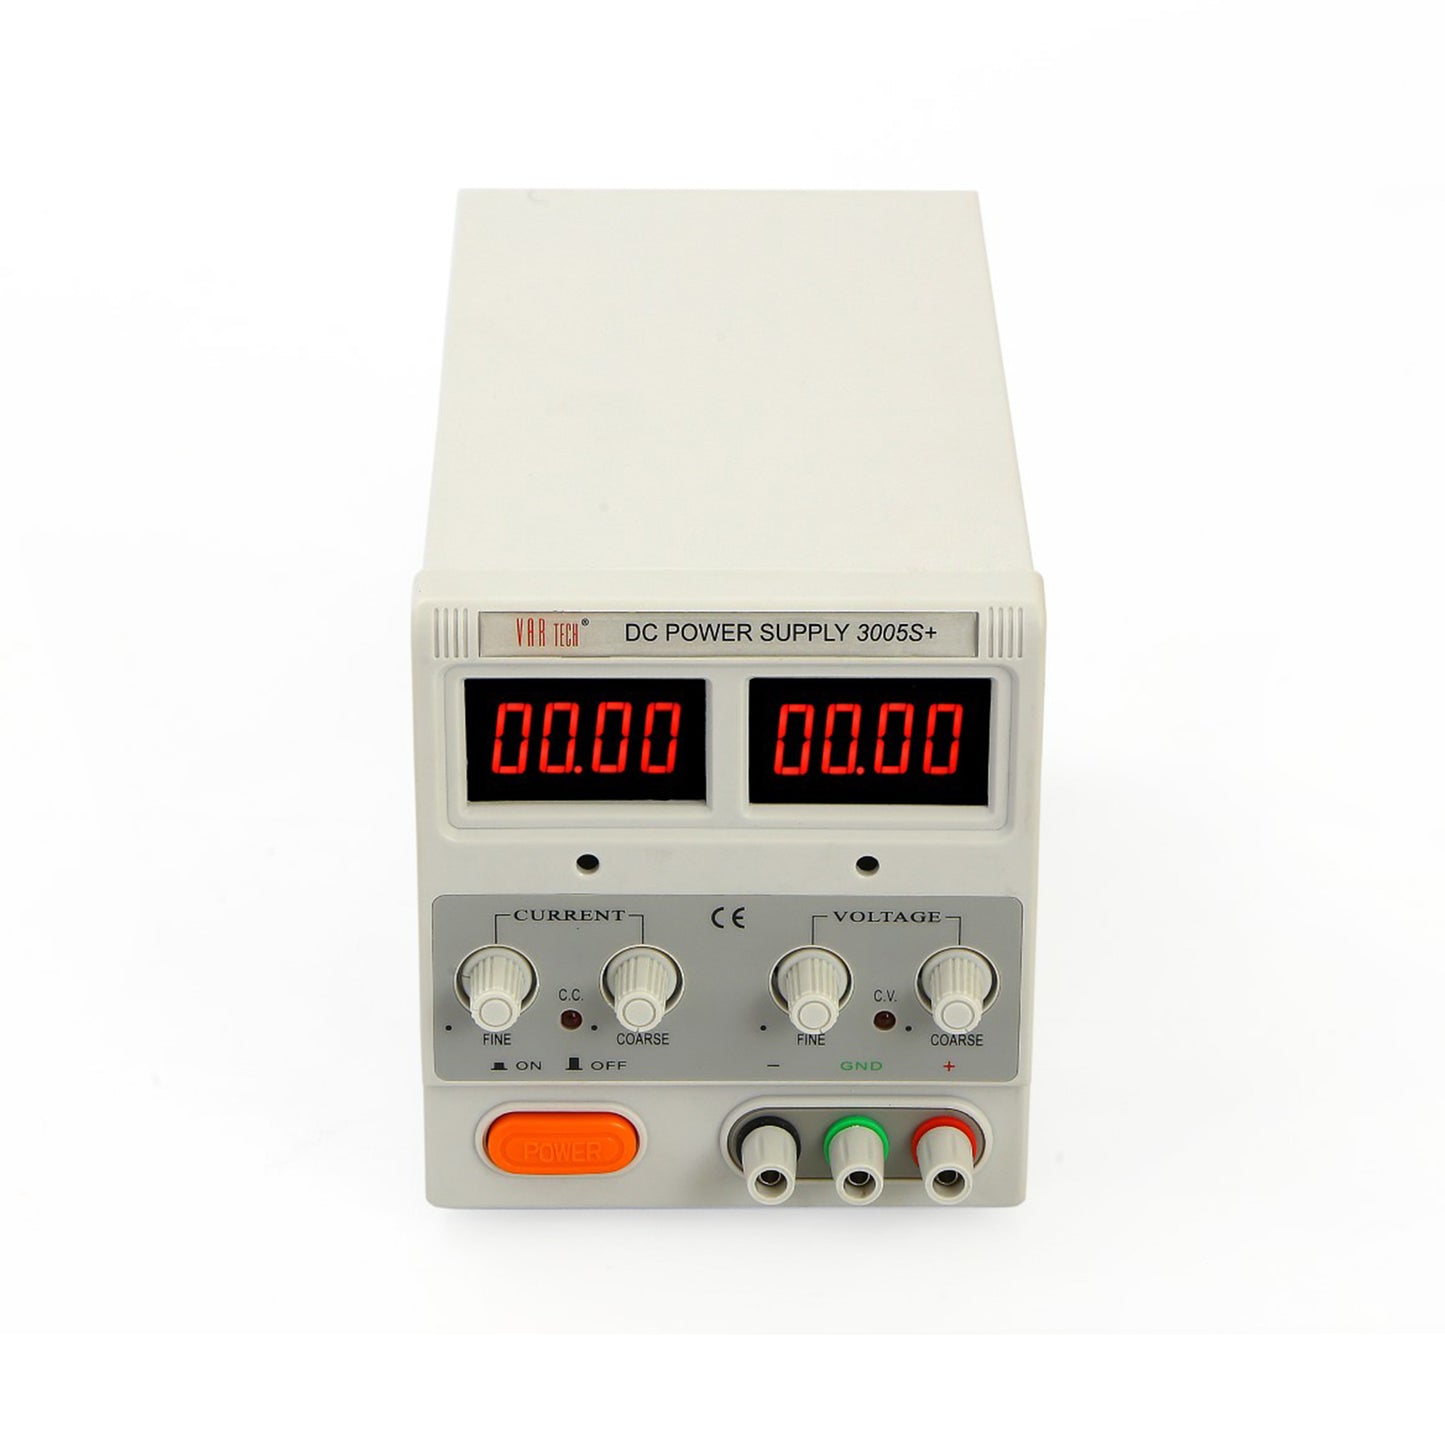 3005 S+ 30V 5A SMPS Based DC regulated power supply